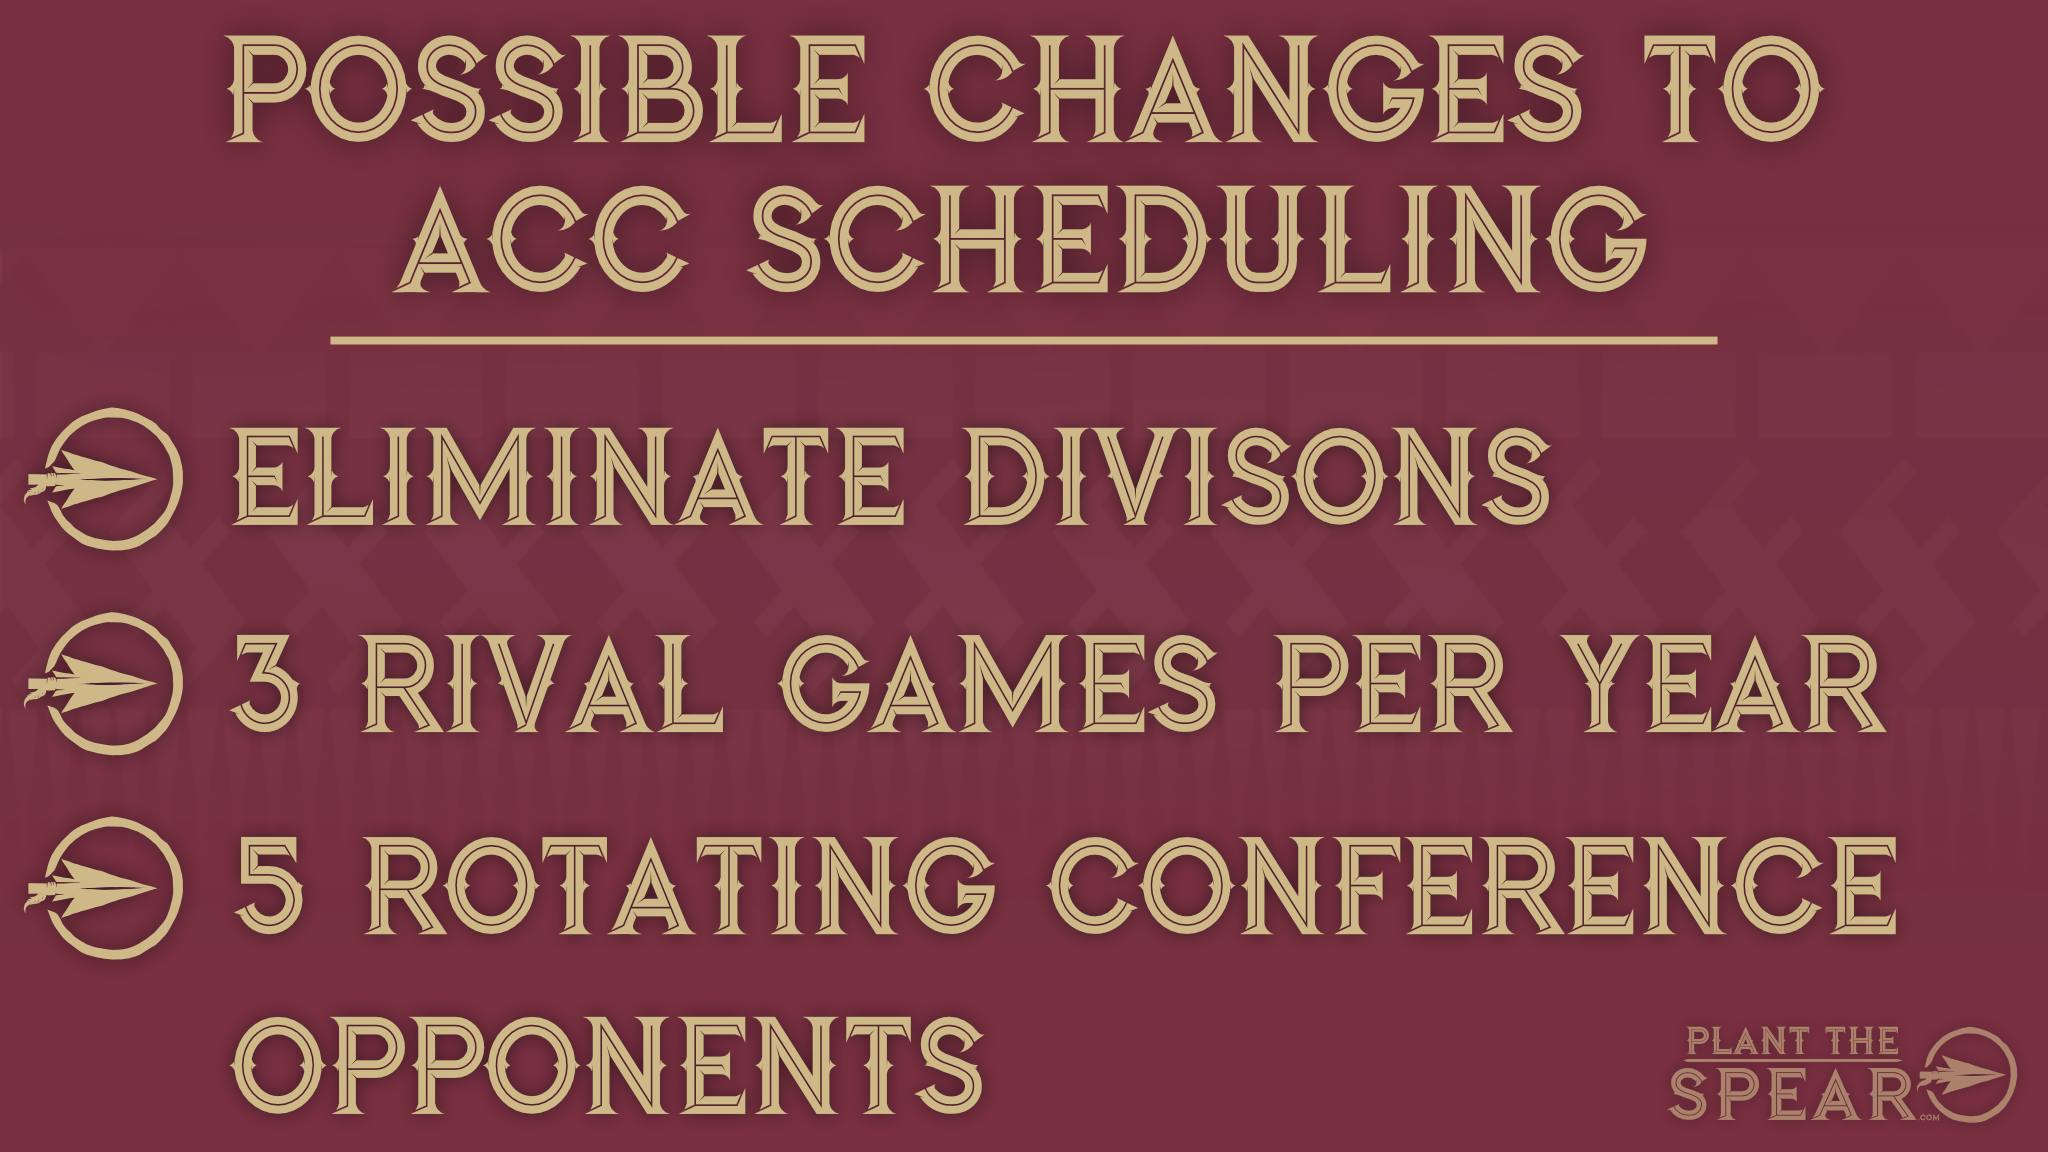 Potential ACC scheduling changes graphic